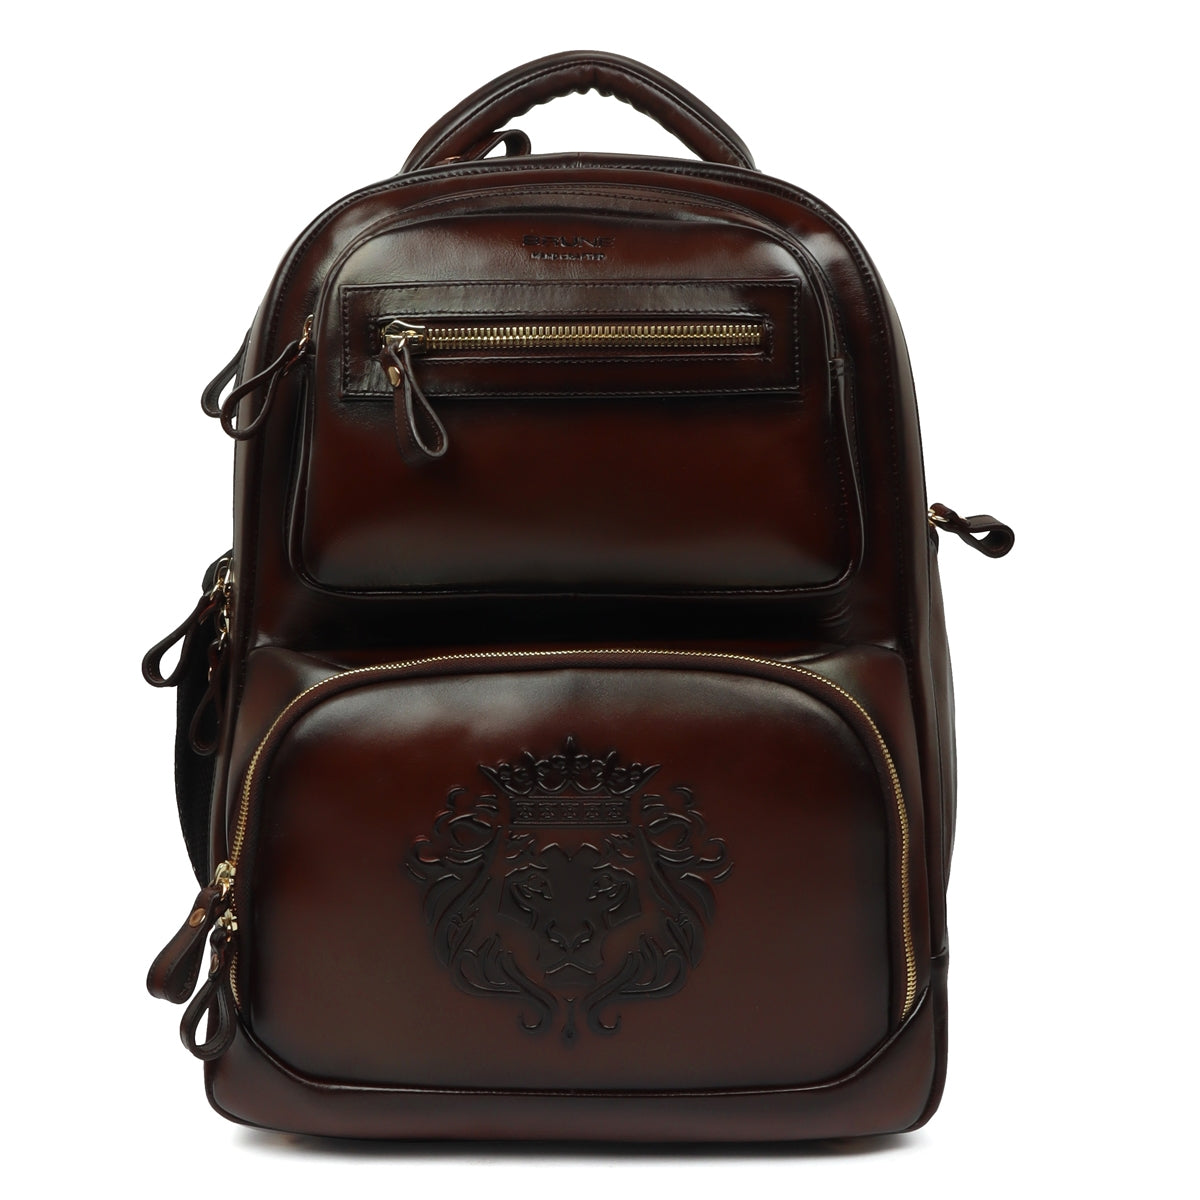 T-20 World Cup 2021 Backpack in Dark Brown Leather with Multi-Step Pockets